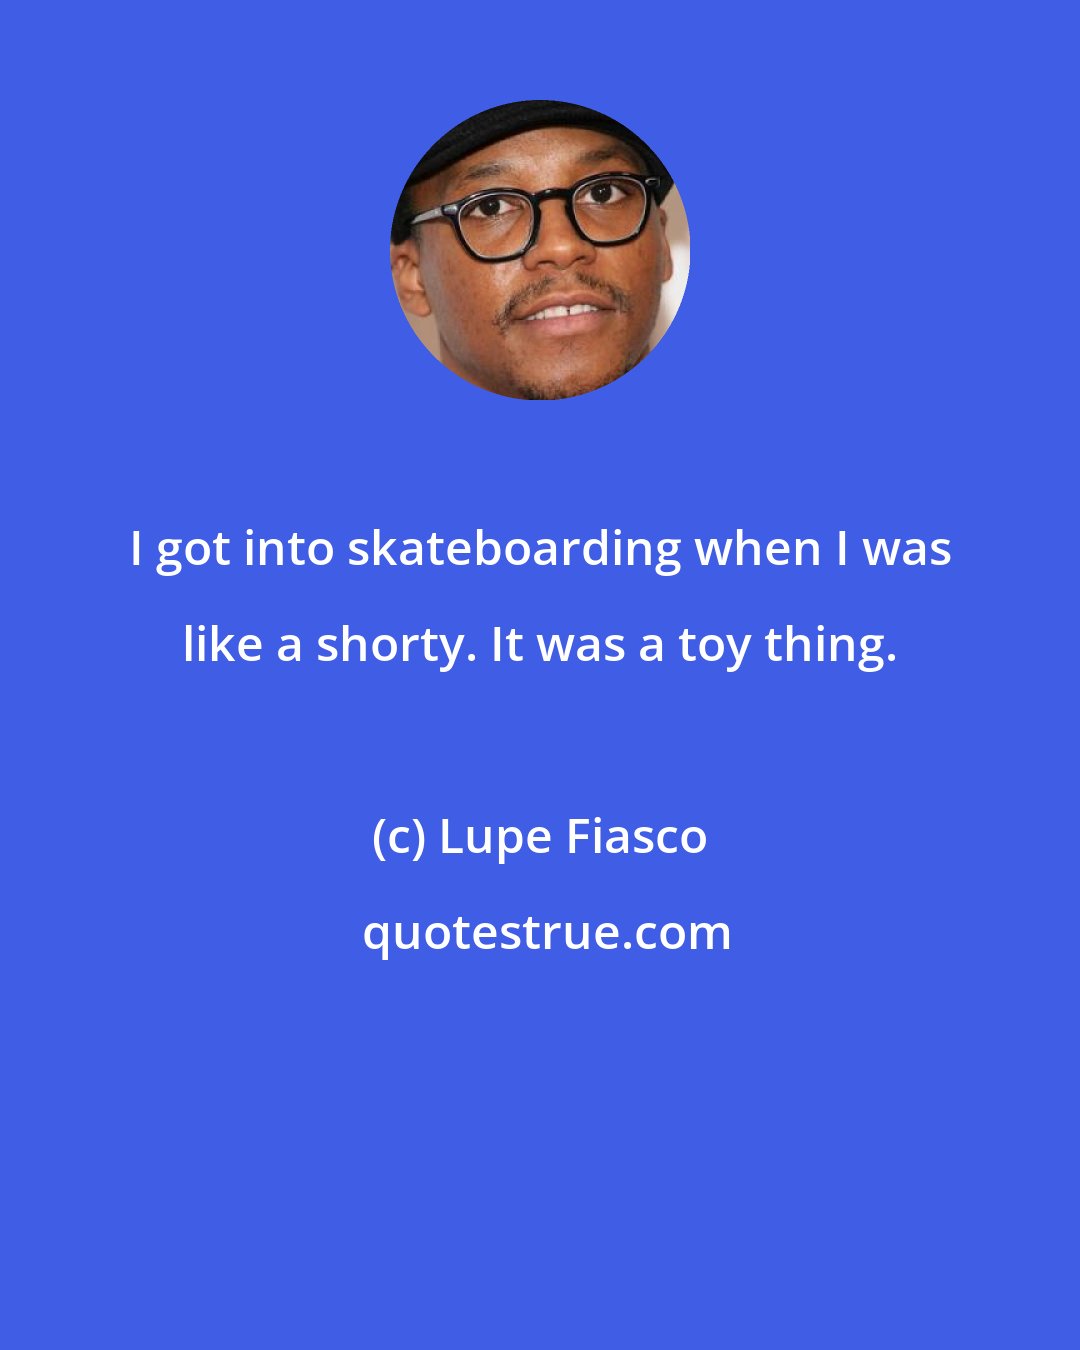 Lupe Fiasco: I got into skateboarding when I was like a shorty. It was a toy thing.